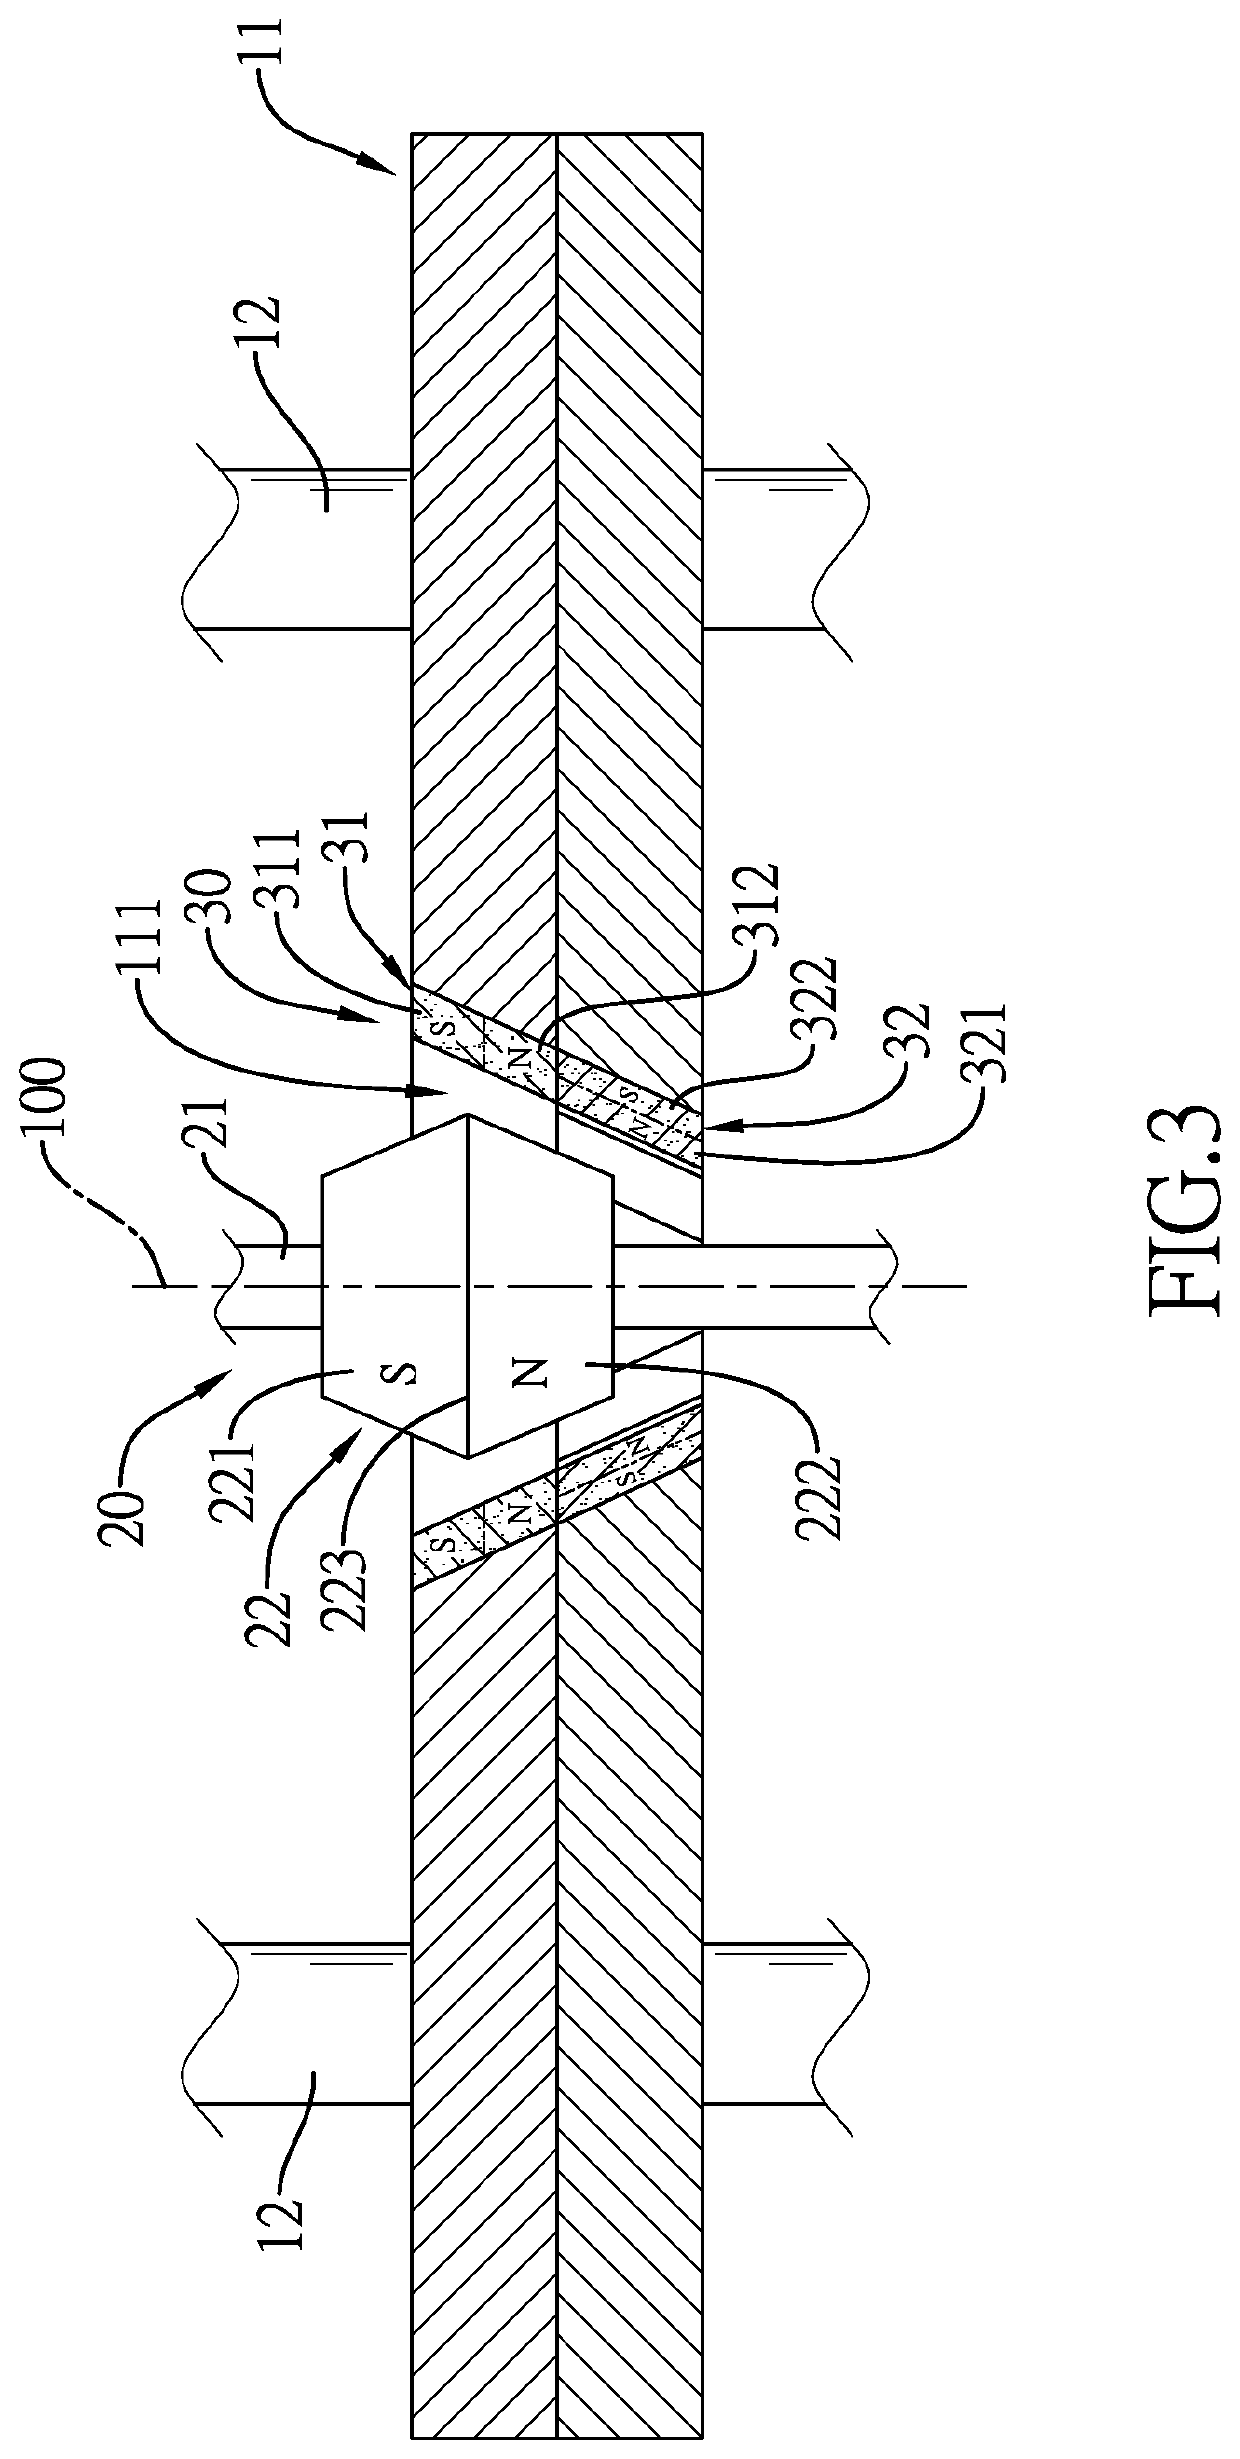 Vertically mounted and magnetically driven power generation apparatus